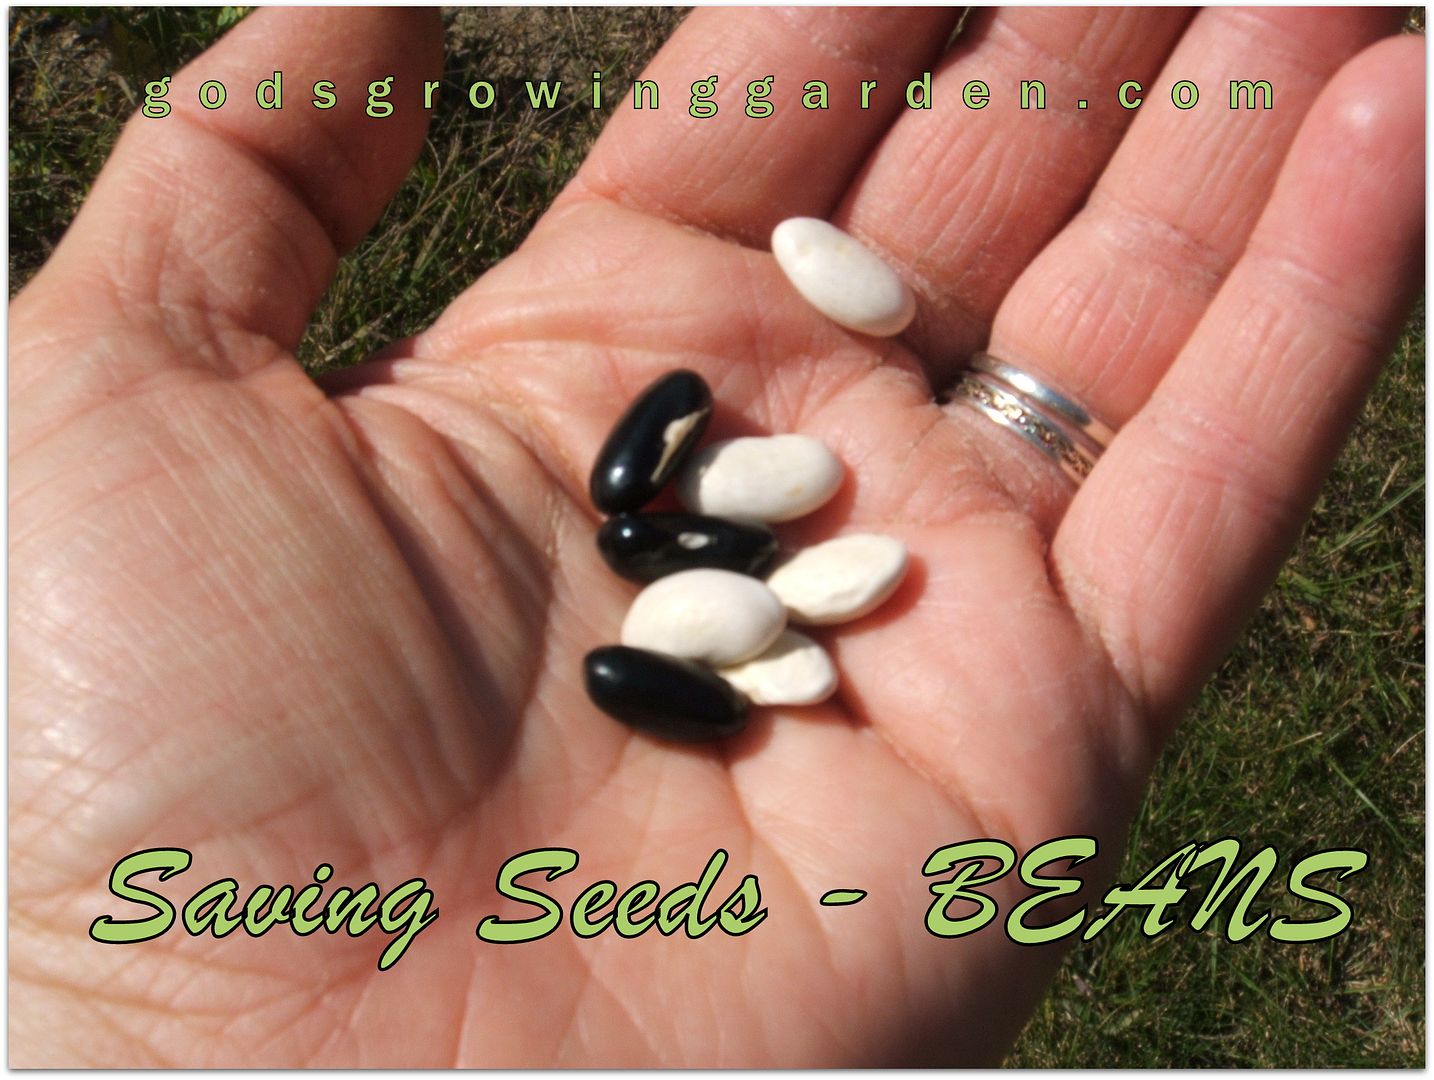 Saving Bean Seeds by Angie Ouellette-Tower for godsgrowinggarden.com photo 006_zps84849005.jpg